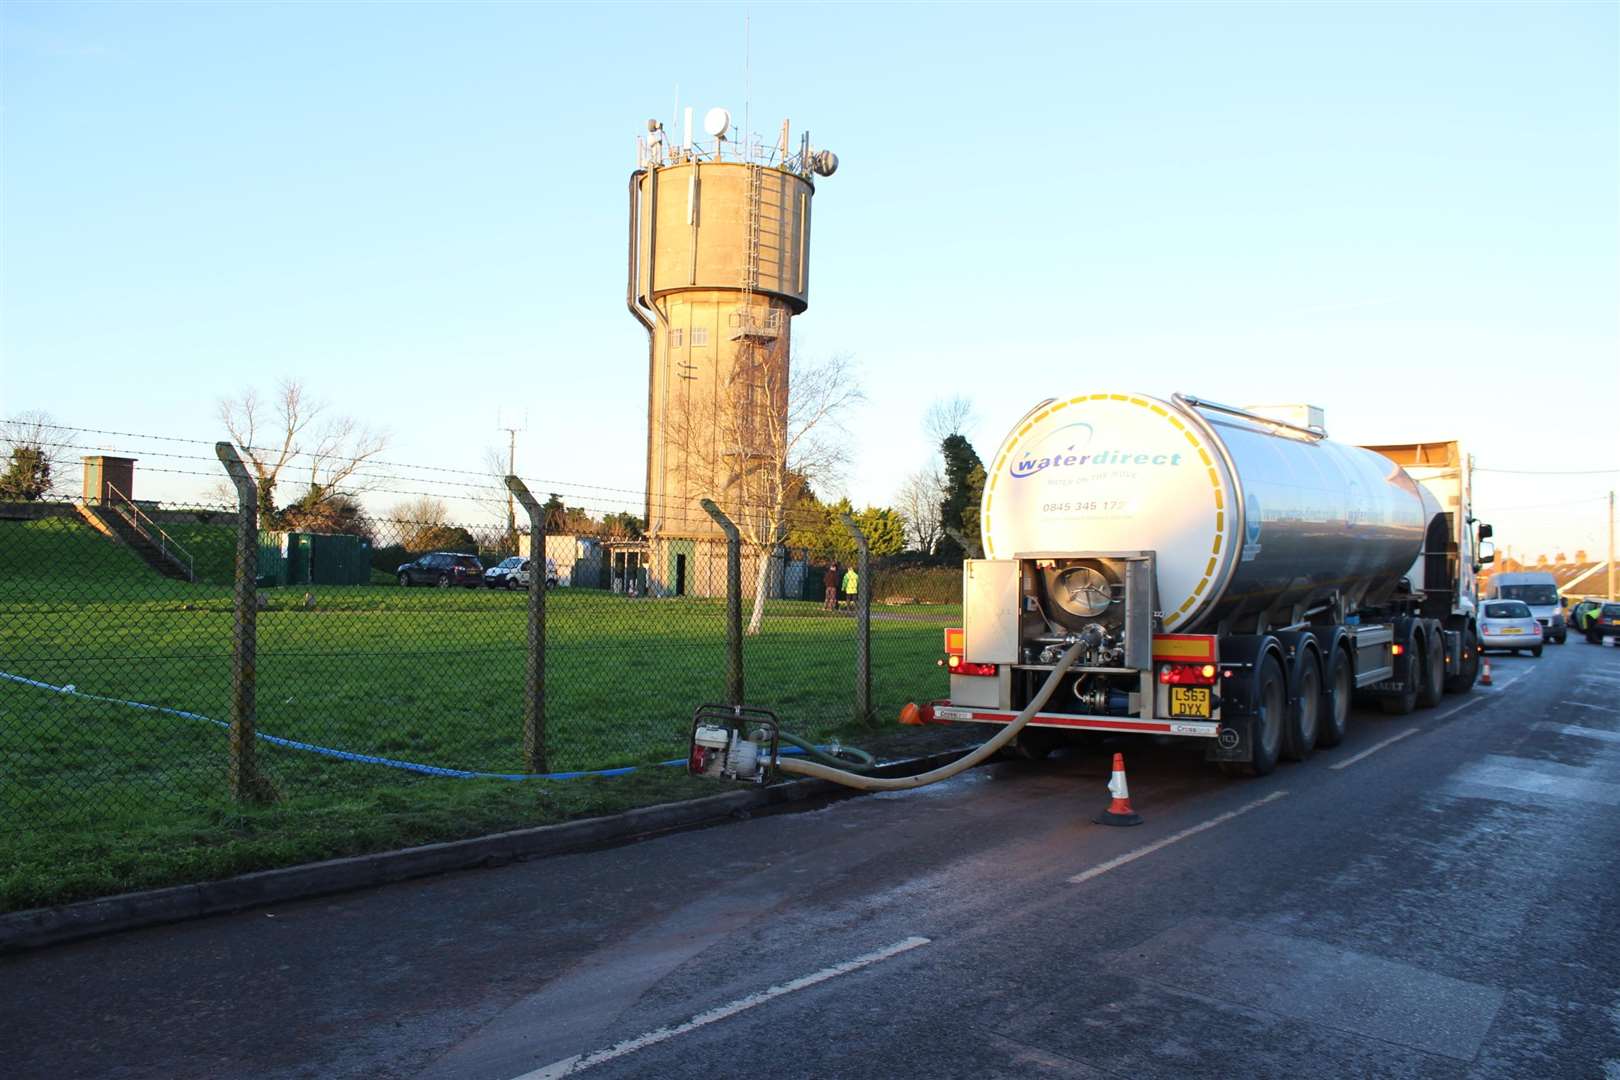 Water tankers ferried supplies to Sheppey to top up the reservoir at Chequers in January, 2016 (1388816)